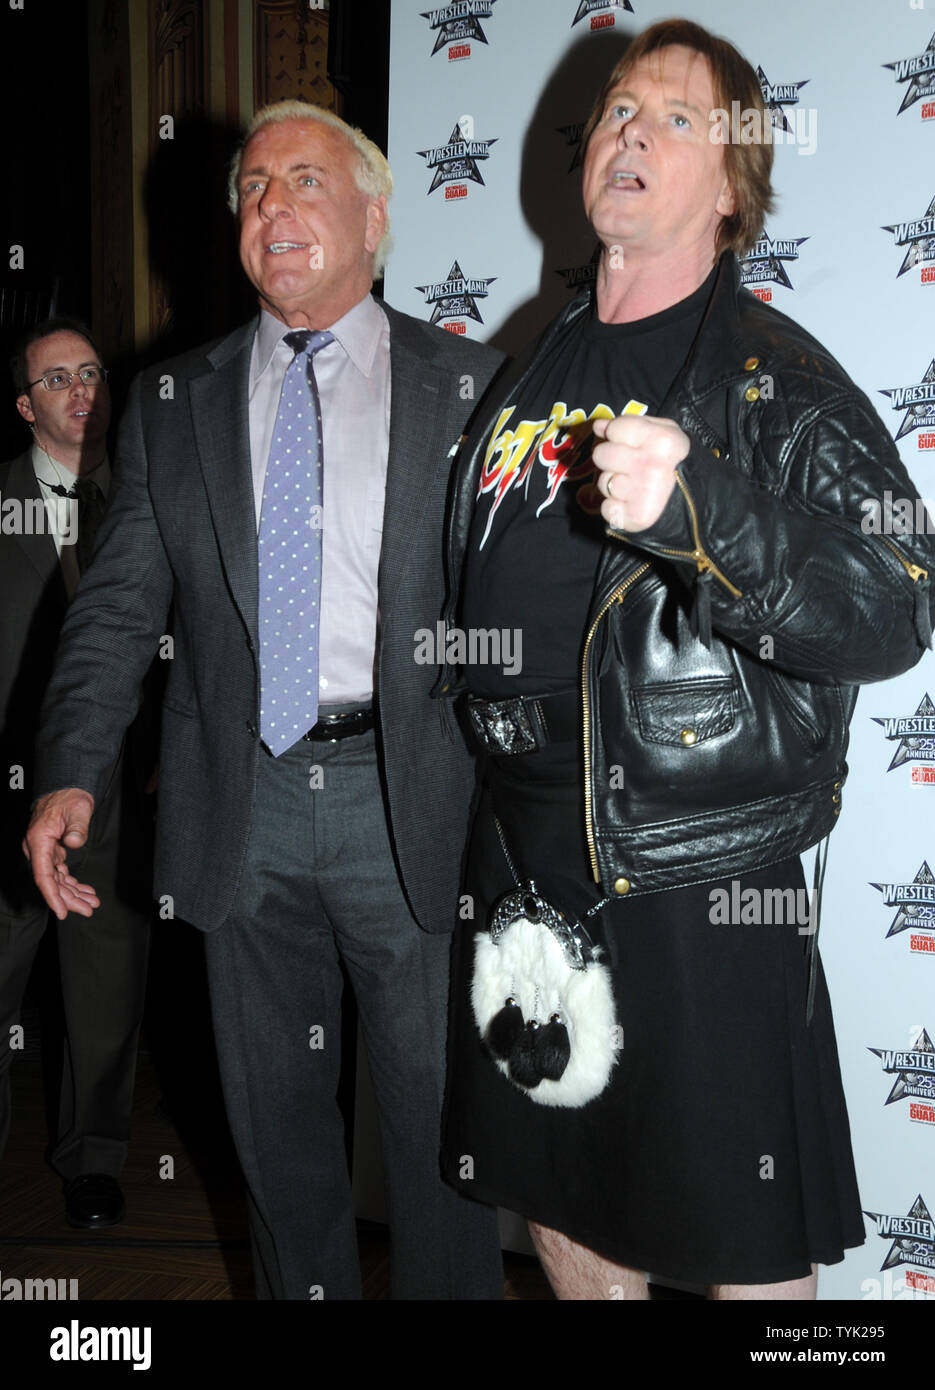 WWE Hall of Famers Ric 'Nature Boy' Flair and Rowdy Roddy Piper (L to R) attend a press conference at New York's Hard Rock Cafe to promote the 25th anniversary of Wrestlemania to be held on April 5, 2009 in Houston Texas.  (UPI Photo/Ezio Petersen) Stock Photo